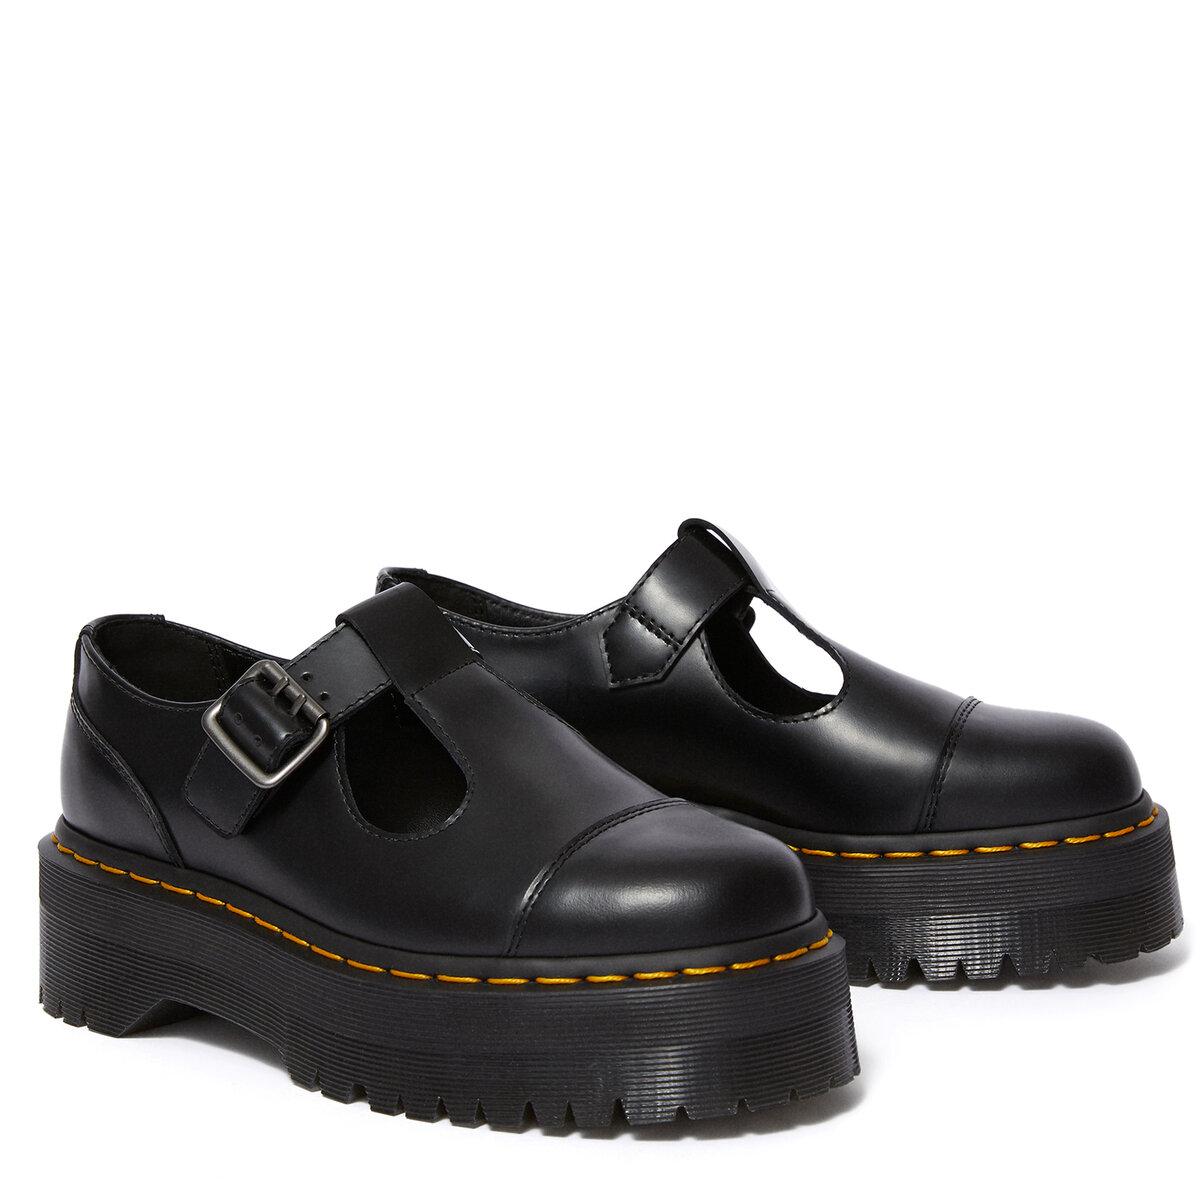 Martens Bethan Polished Smooth Leather Platform Shoes Black Dr Womens Shoes Flats and flat shoes Loafers and moccasins 